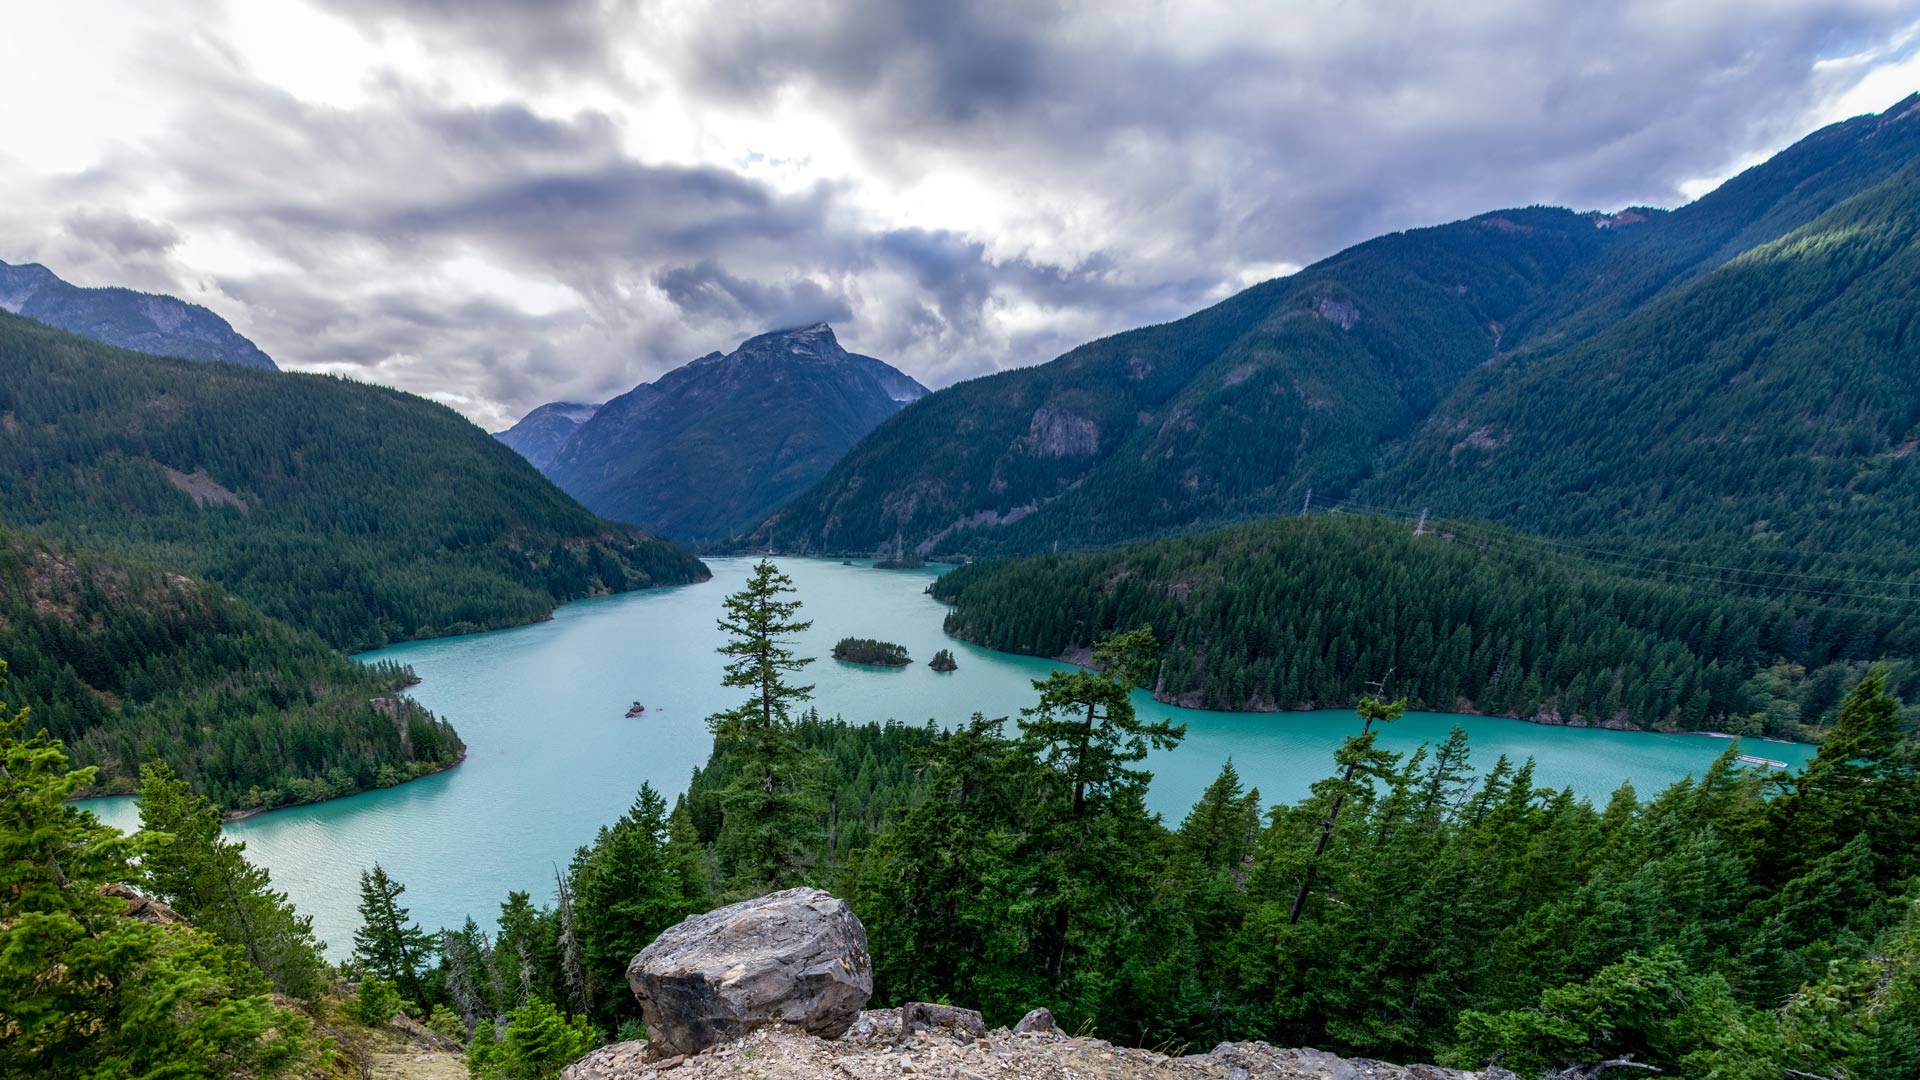 Landscape image of green mountains with a blue lake below it on a cloudy day.